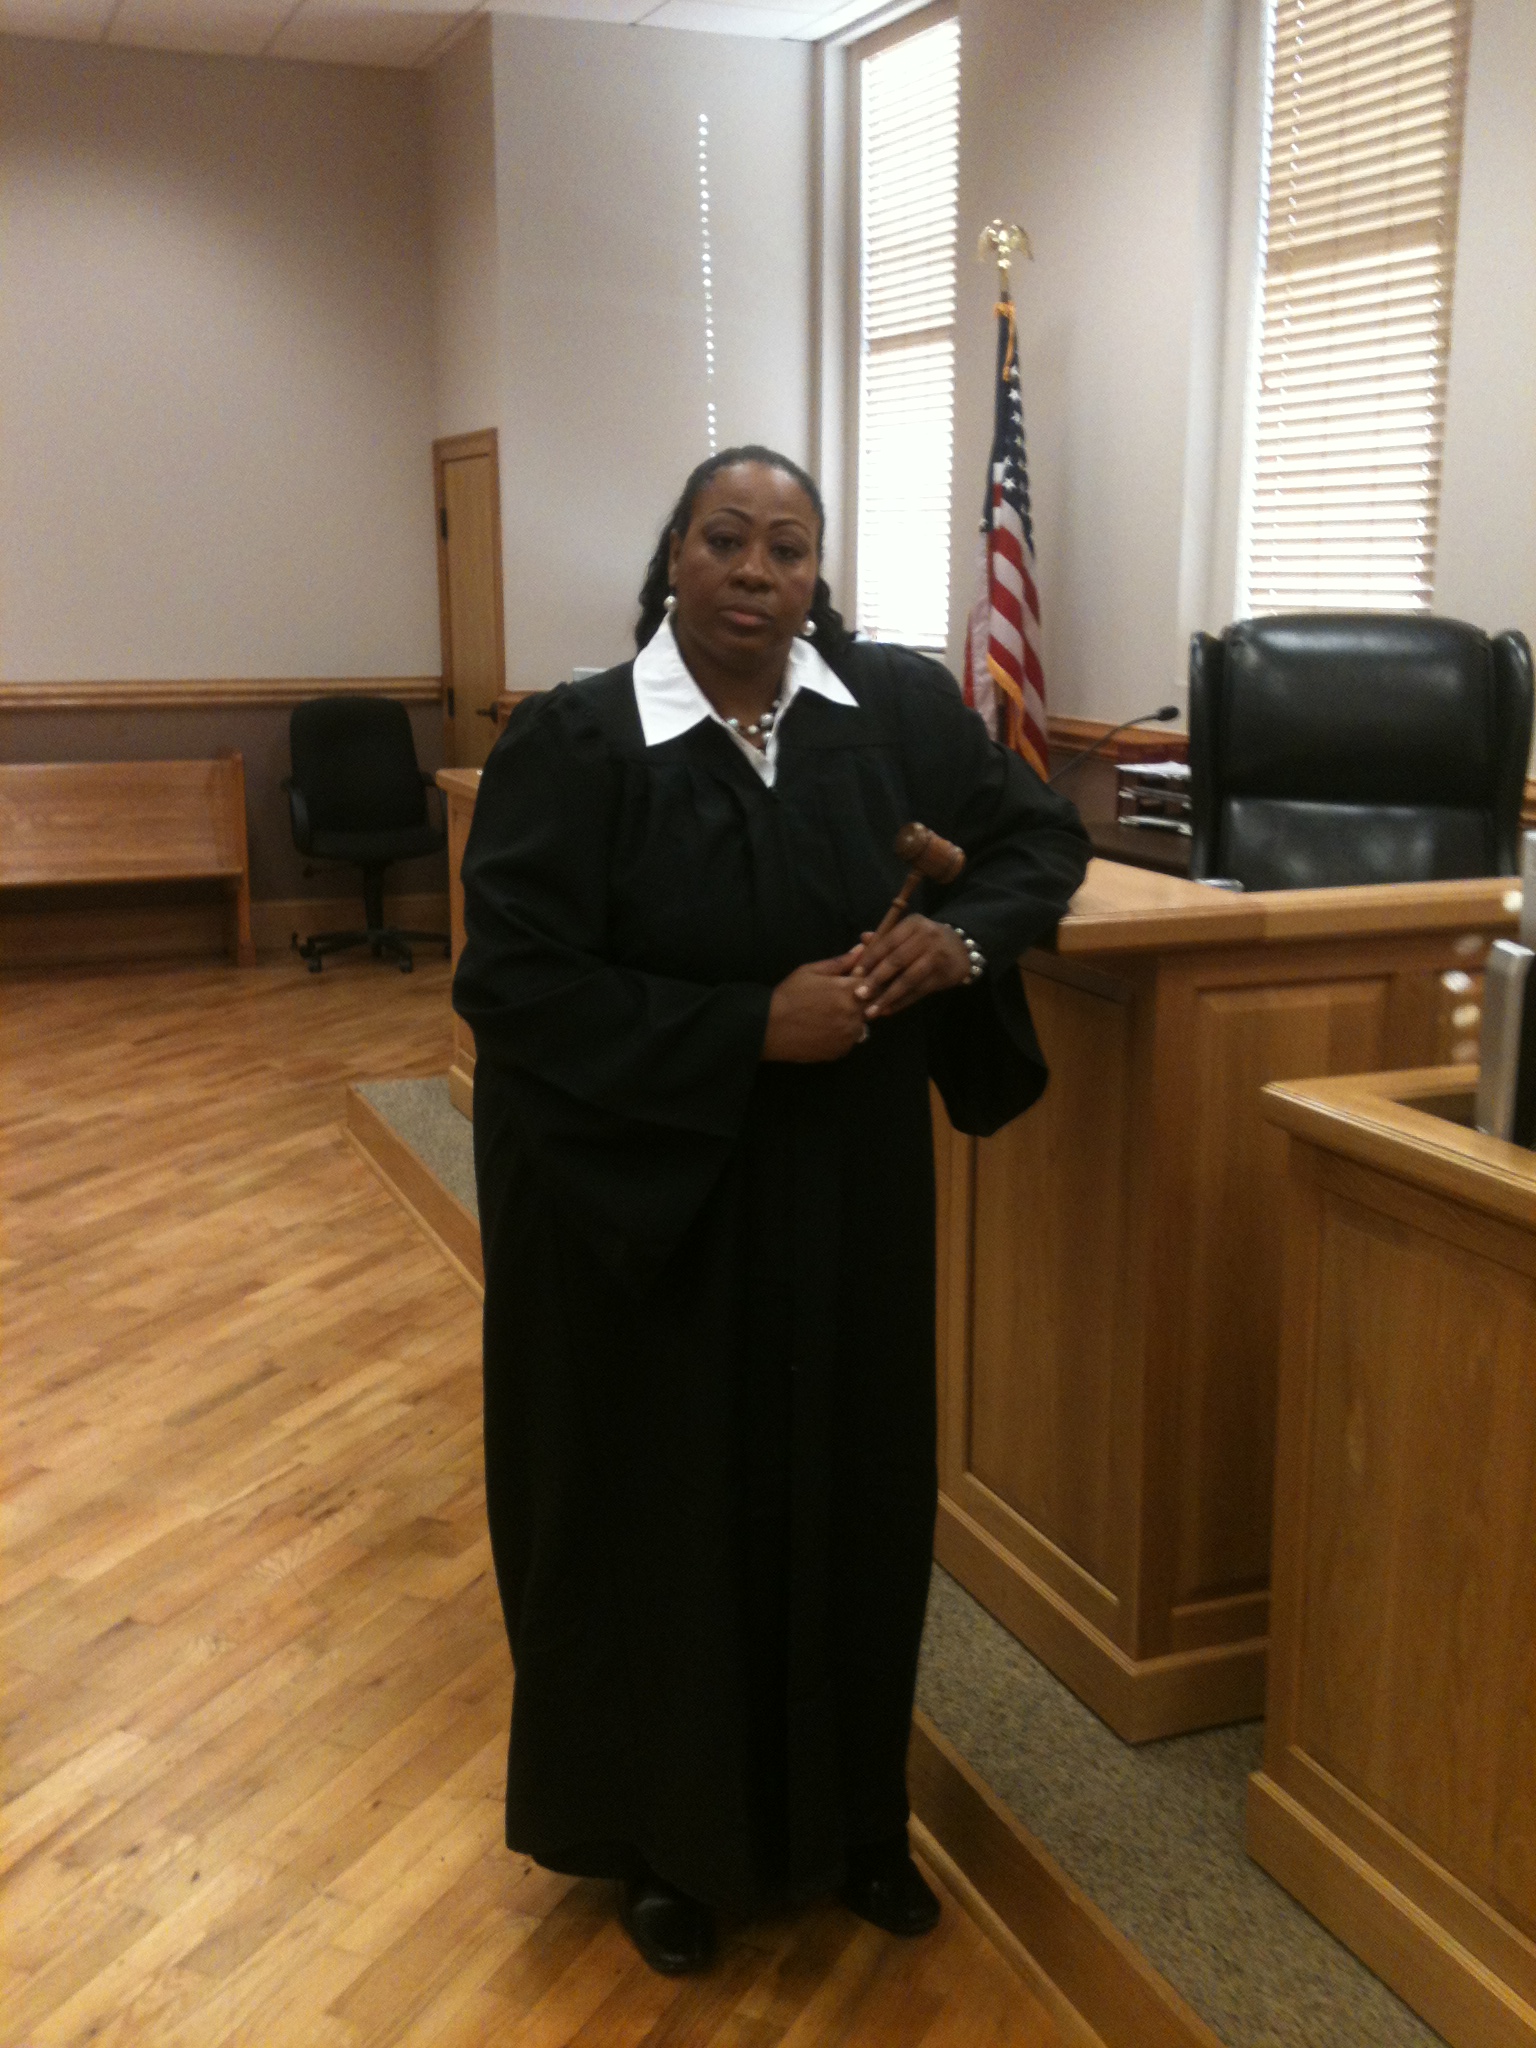 On the set of  Advocate & Solicitor, a hour television drama. Myself as Judge Carolyn Stokes